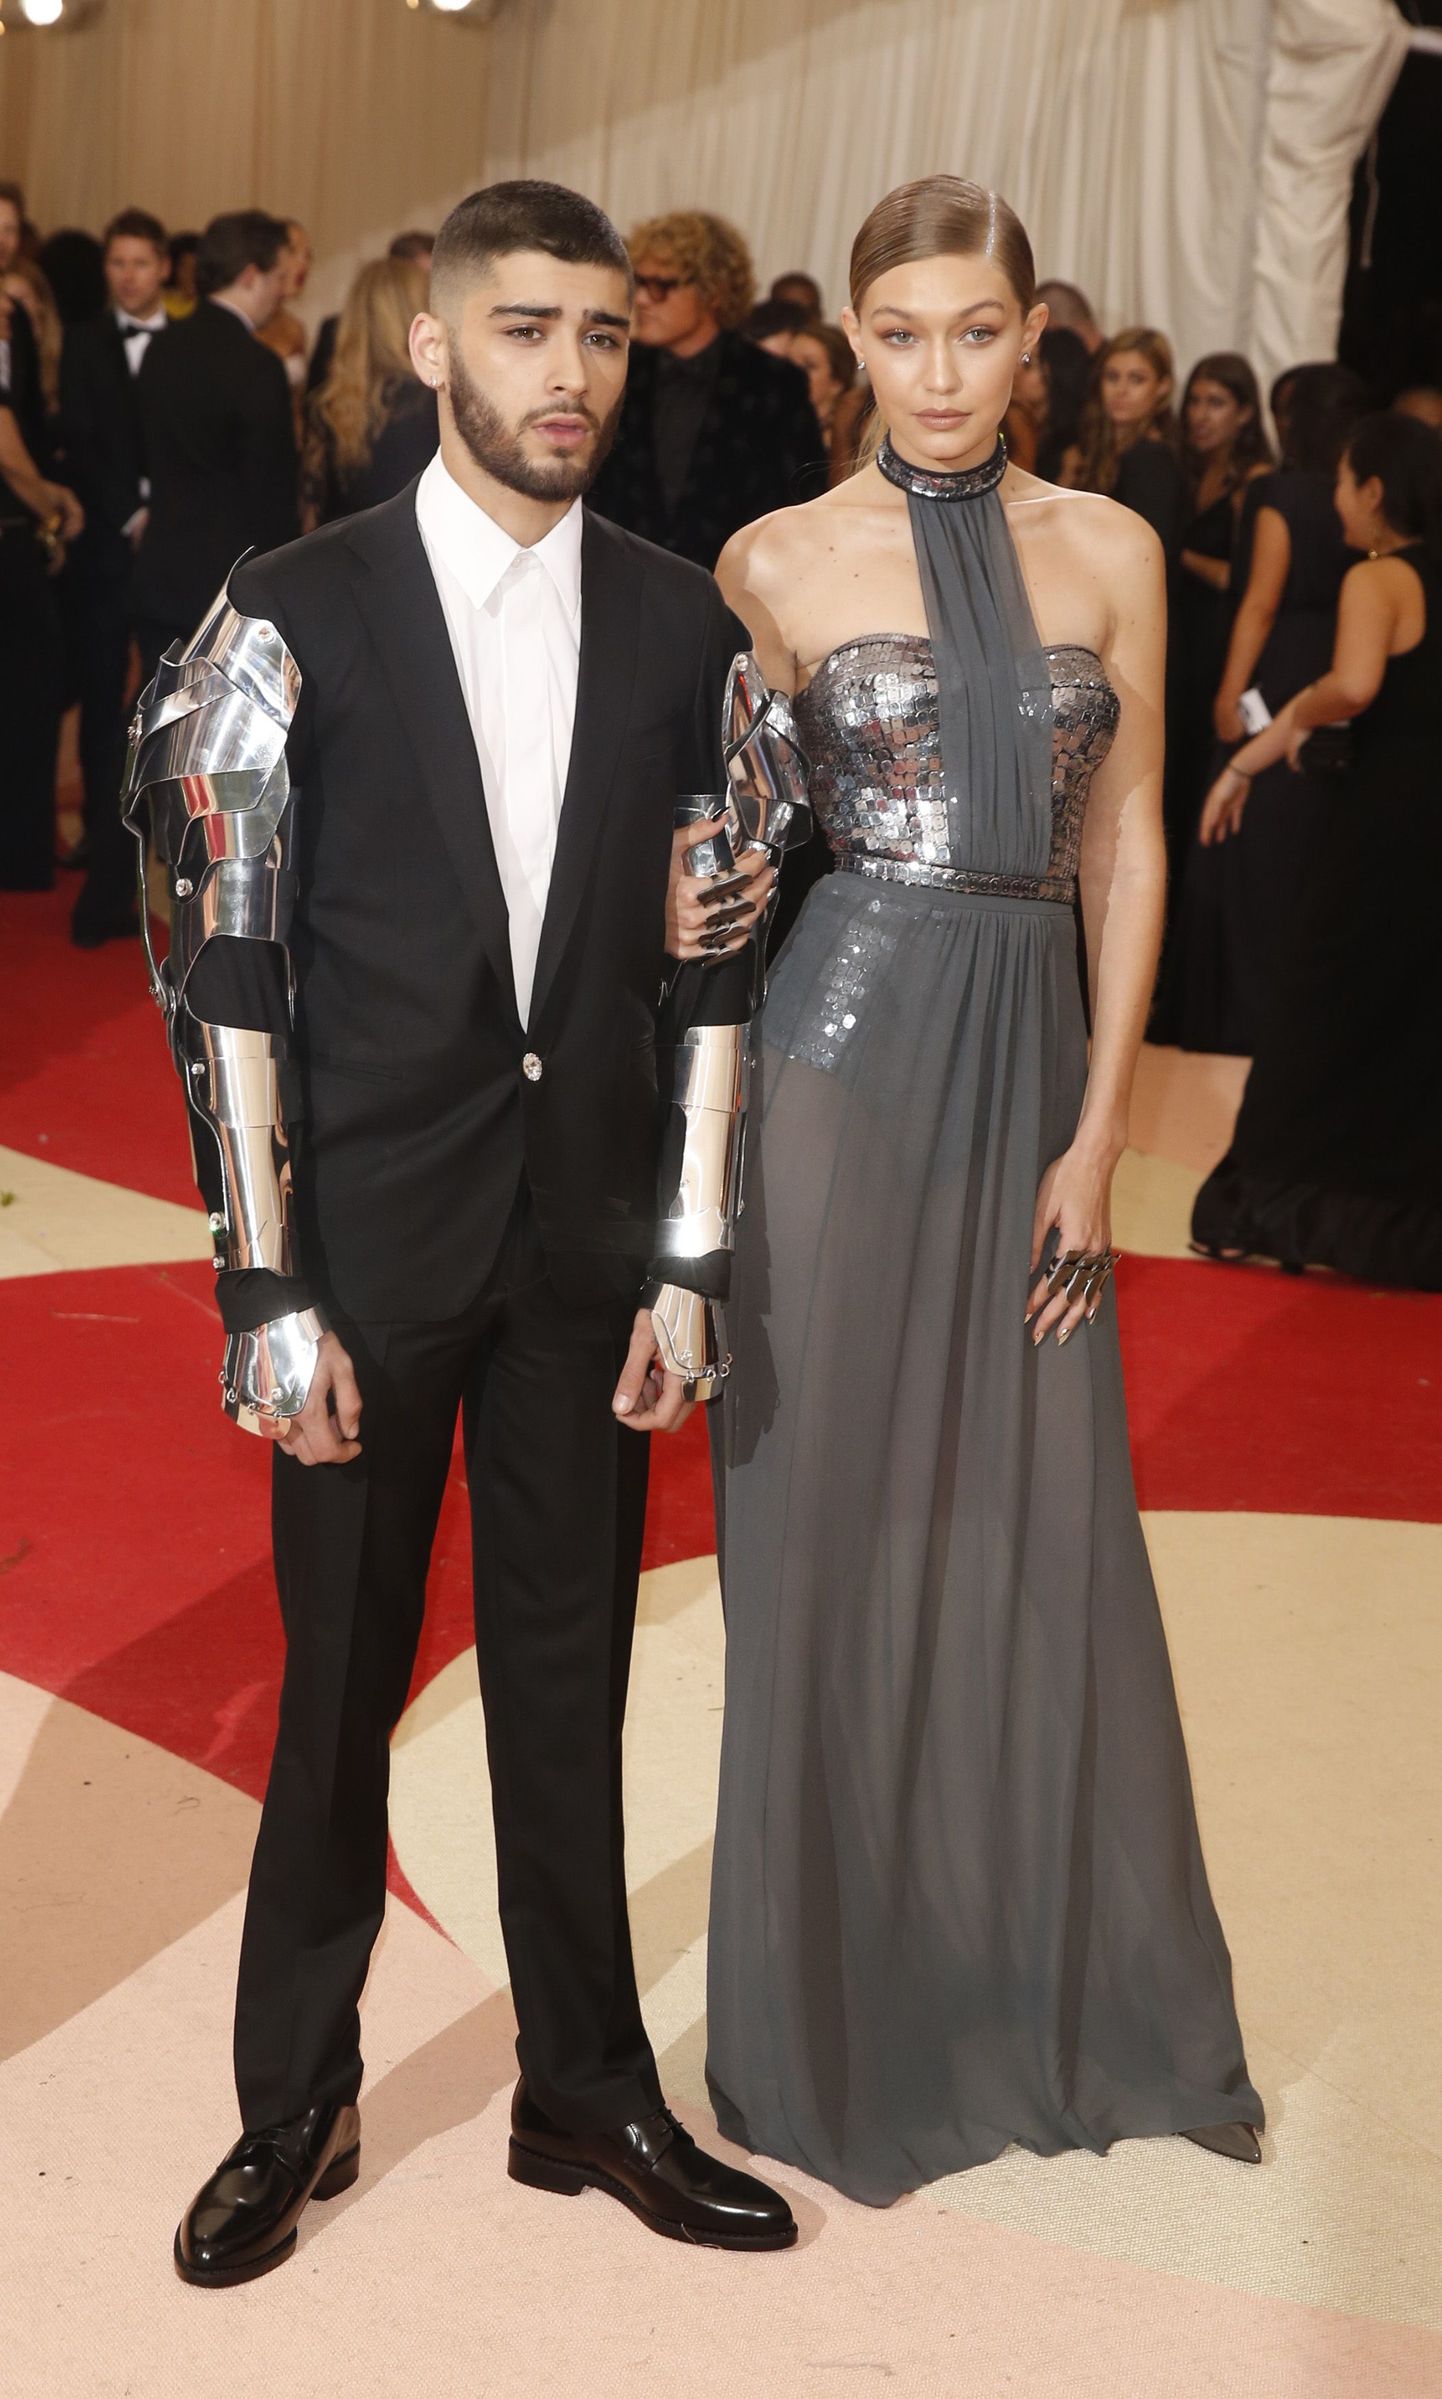 Model Gigi Hadid and singer Zayn Malik arrive at the Metropolitan Museum of Art Costume Institute Gala (Met Gala) to celebrate the opening of "Manus x Machina: Fashion in an Age of Technology" in the Manhattan borough of New York, U.S. May 2, 2016.  REUTERS/Lucas Jackson